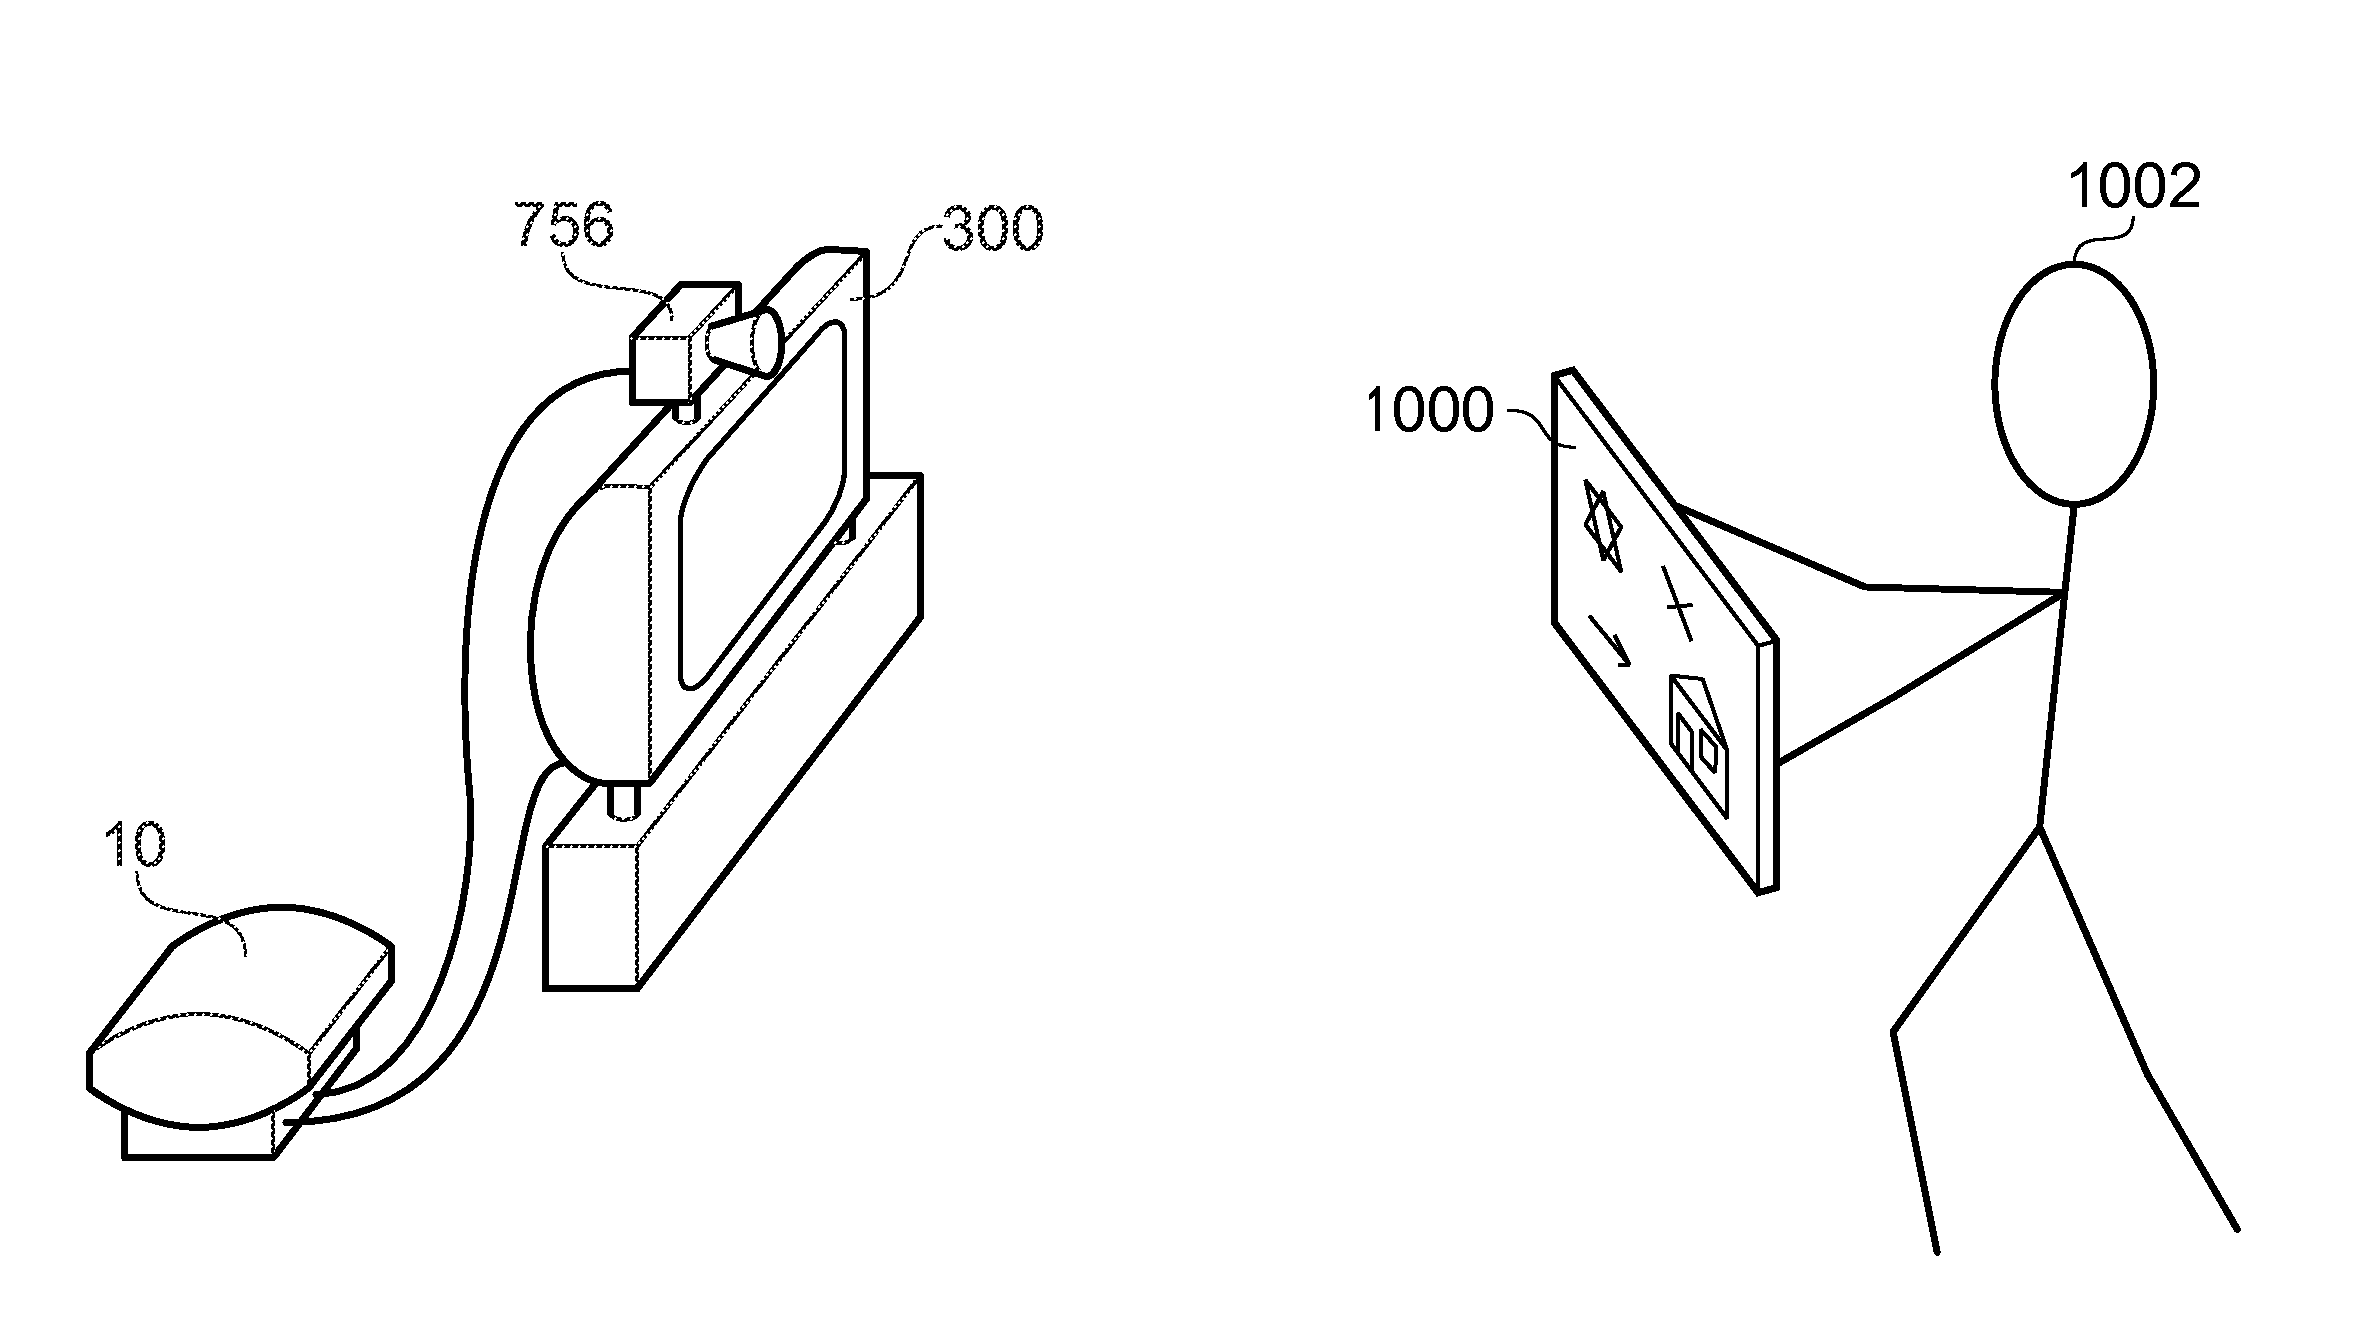 Image processing method, apparatus and system